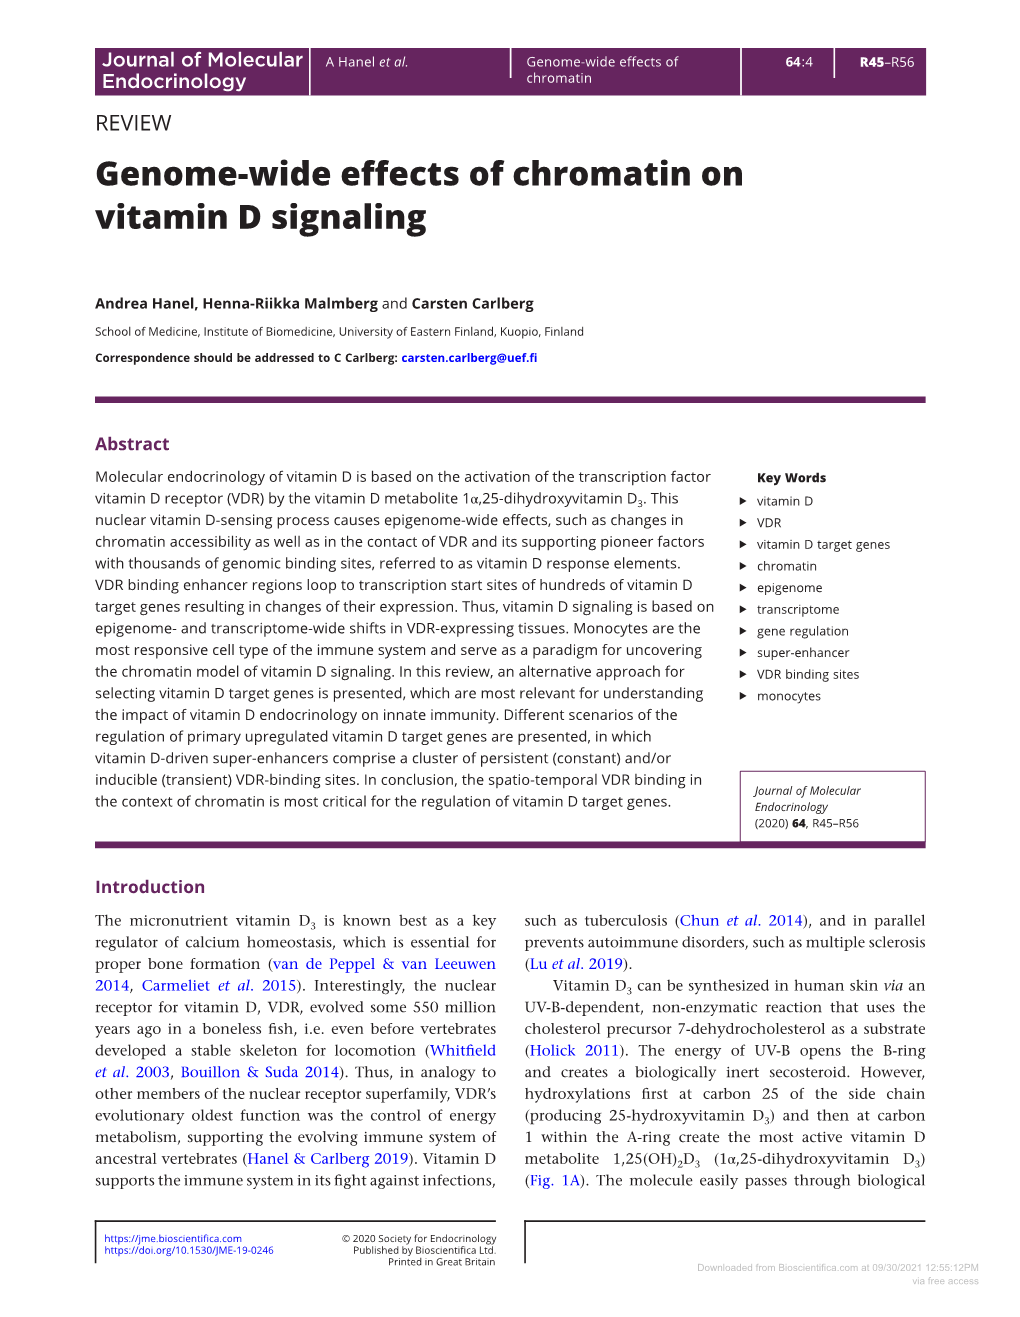 Genome-Wide Effects of Chromatin on Vitamin D Signaling